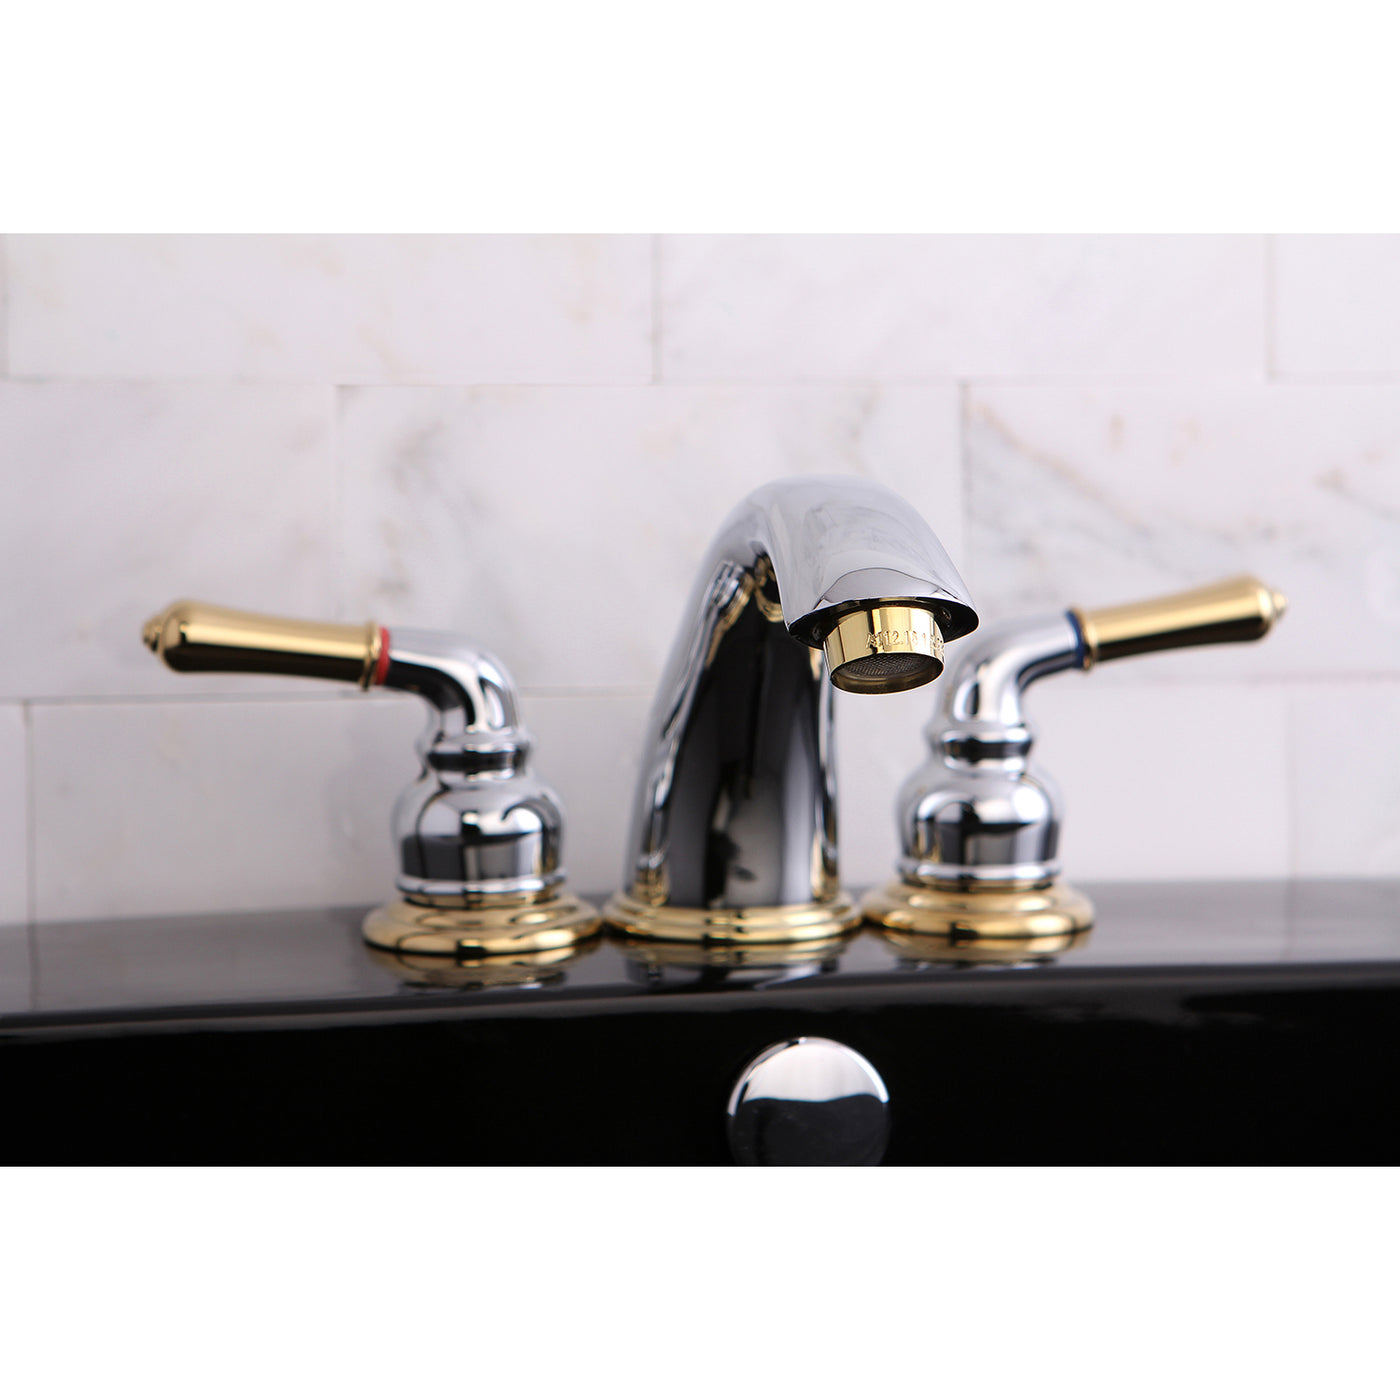 Elements of Design EB964 Widespread Bathroom Faucet with Retail Pop-Up, Polished Chrome/Polished Brass